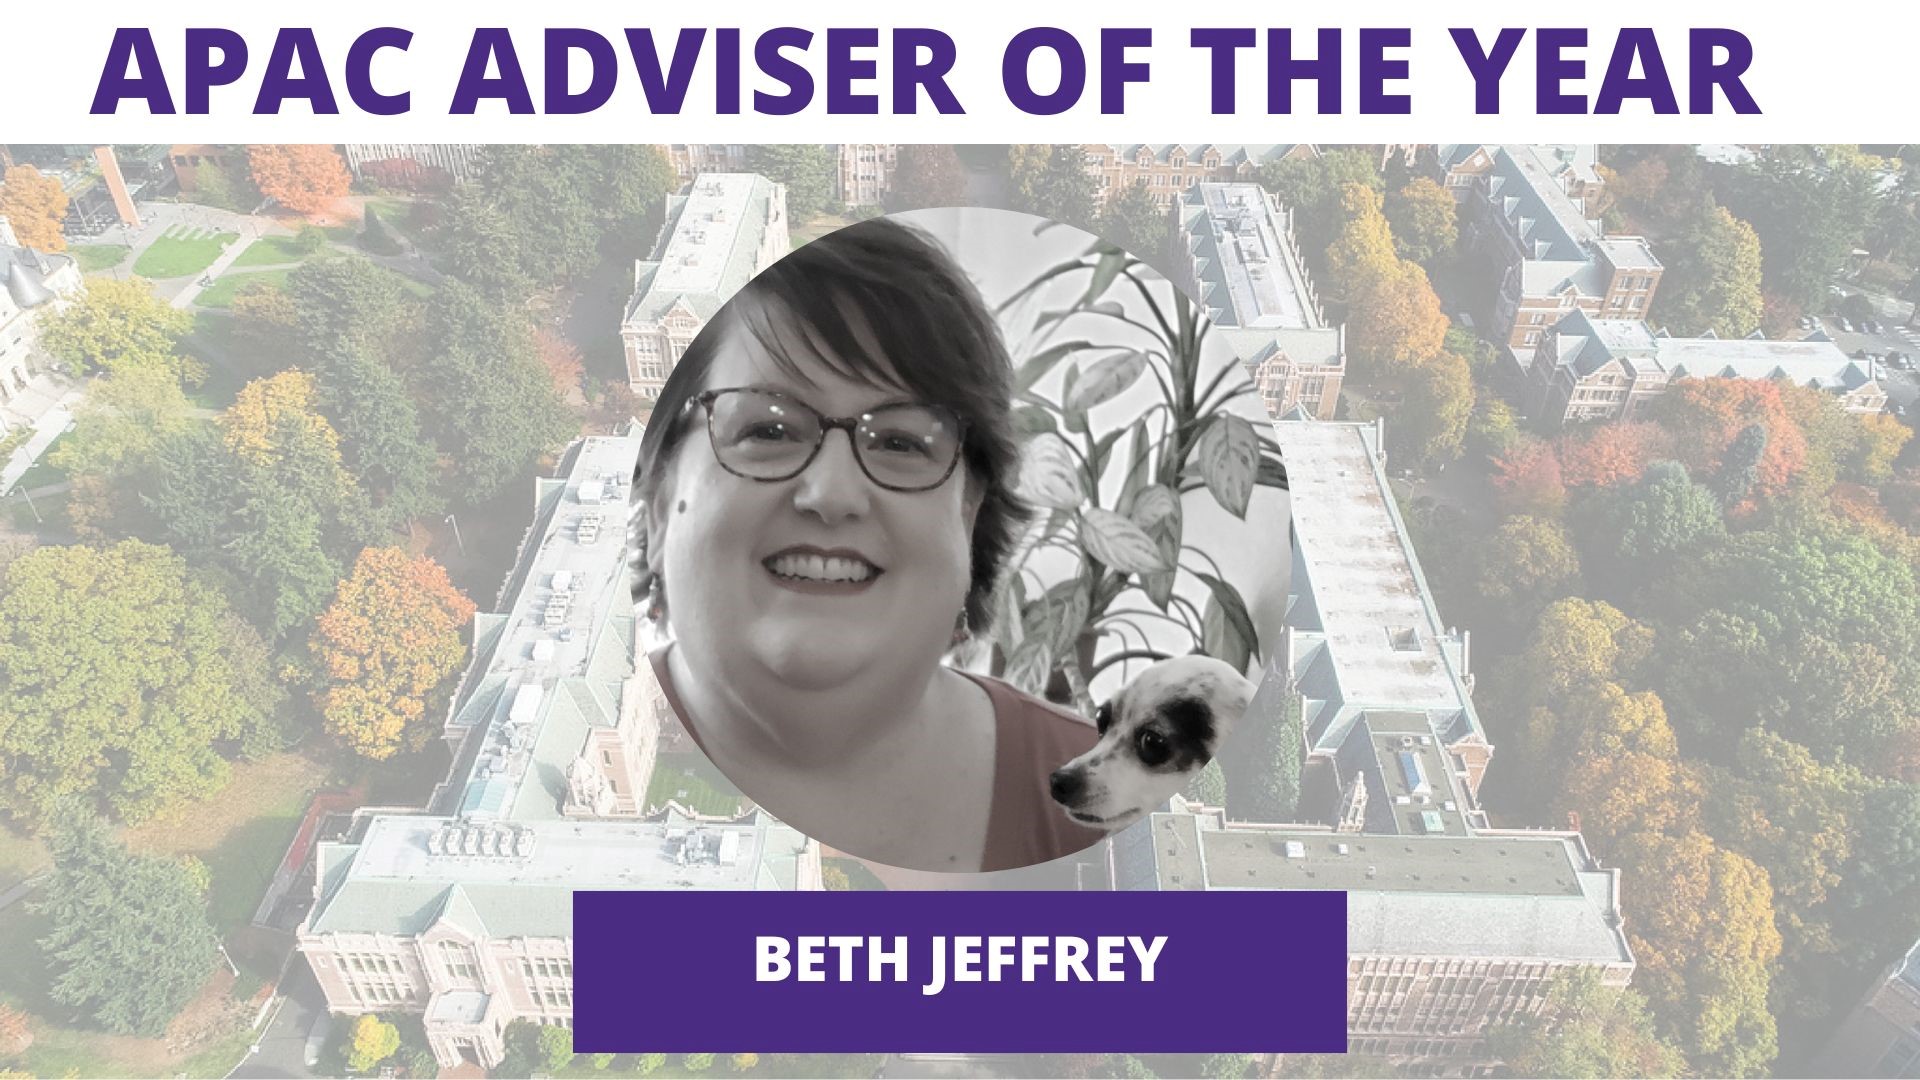 A profile image of Beth Jeffrey - APAC Adviser Of The Year